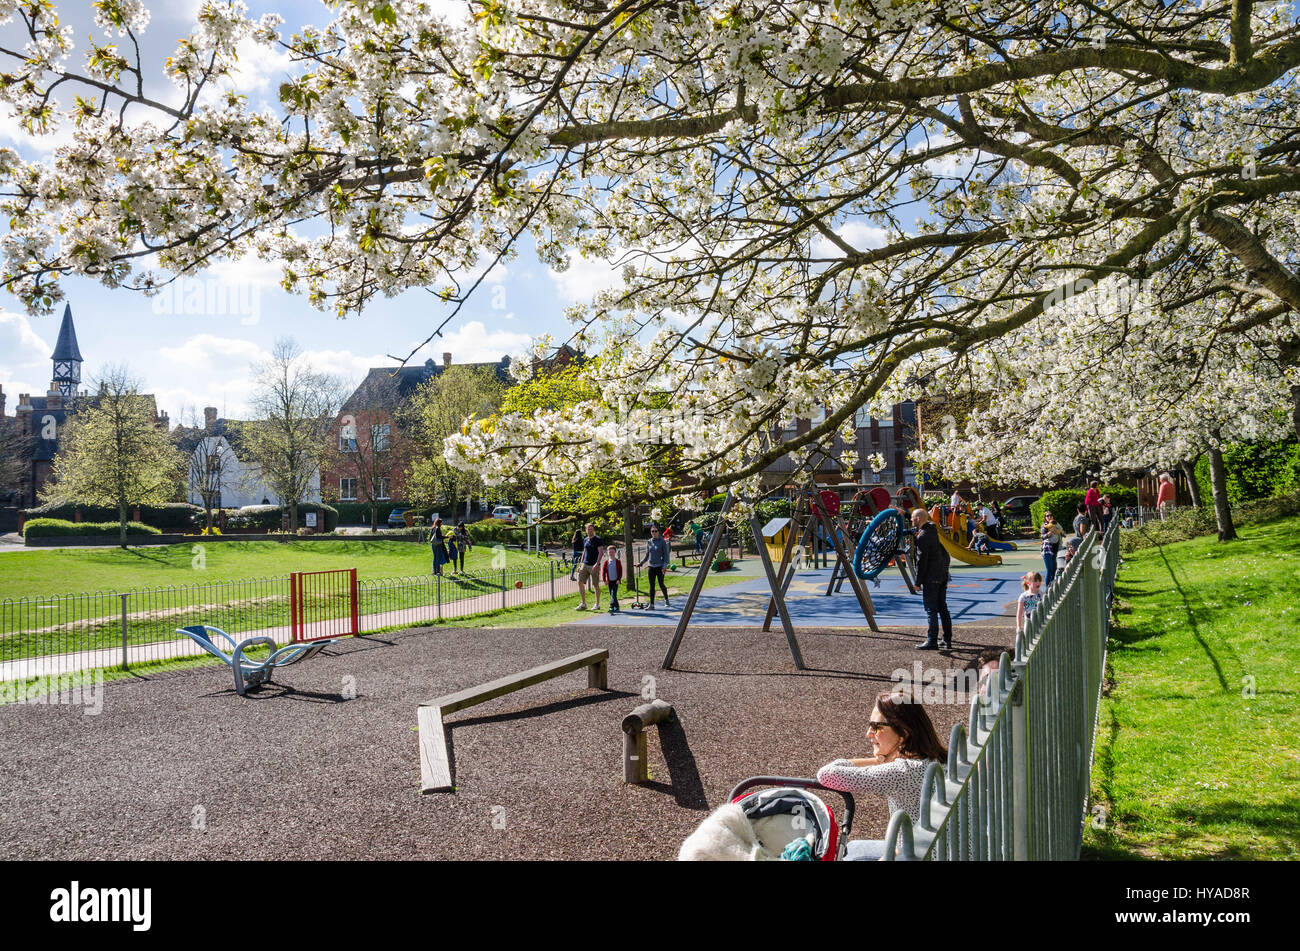 Branches of an ornamental tree, covered in white cherry blossom reach out across the playground in Bachelors Acre park in Windsor, Berkshire, UK. Stock Photo